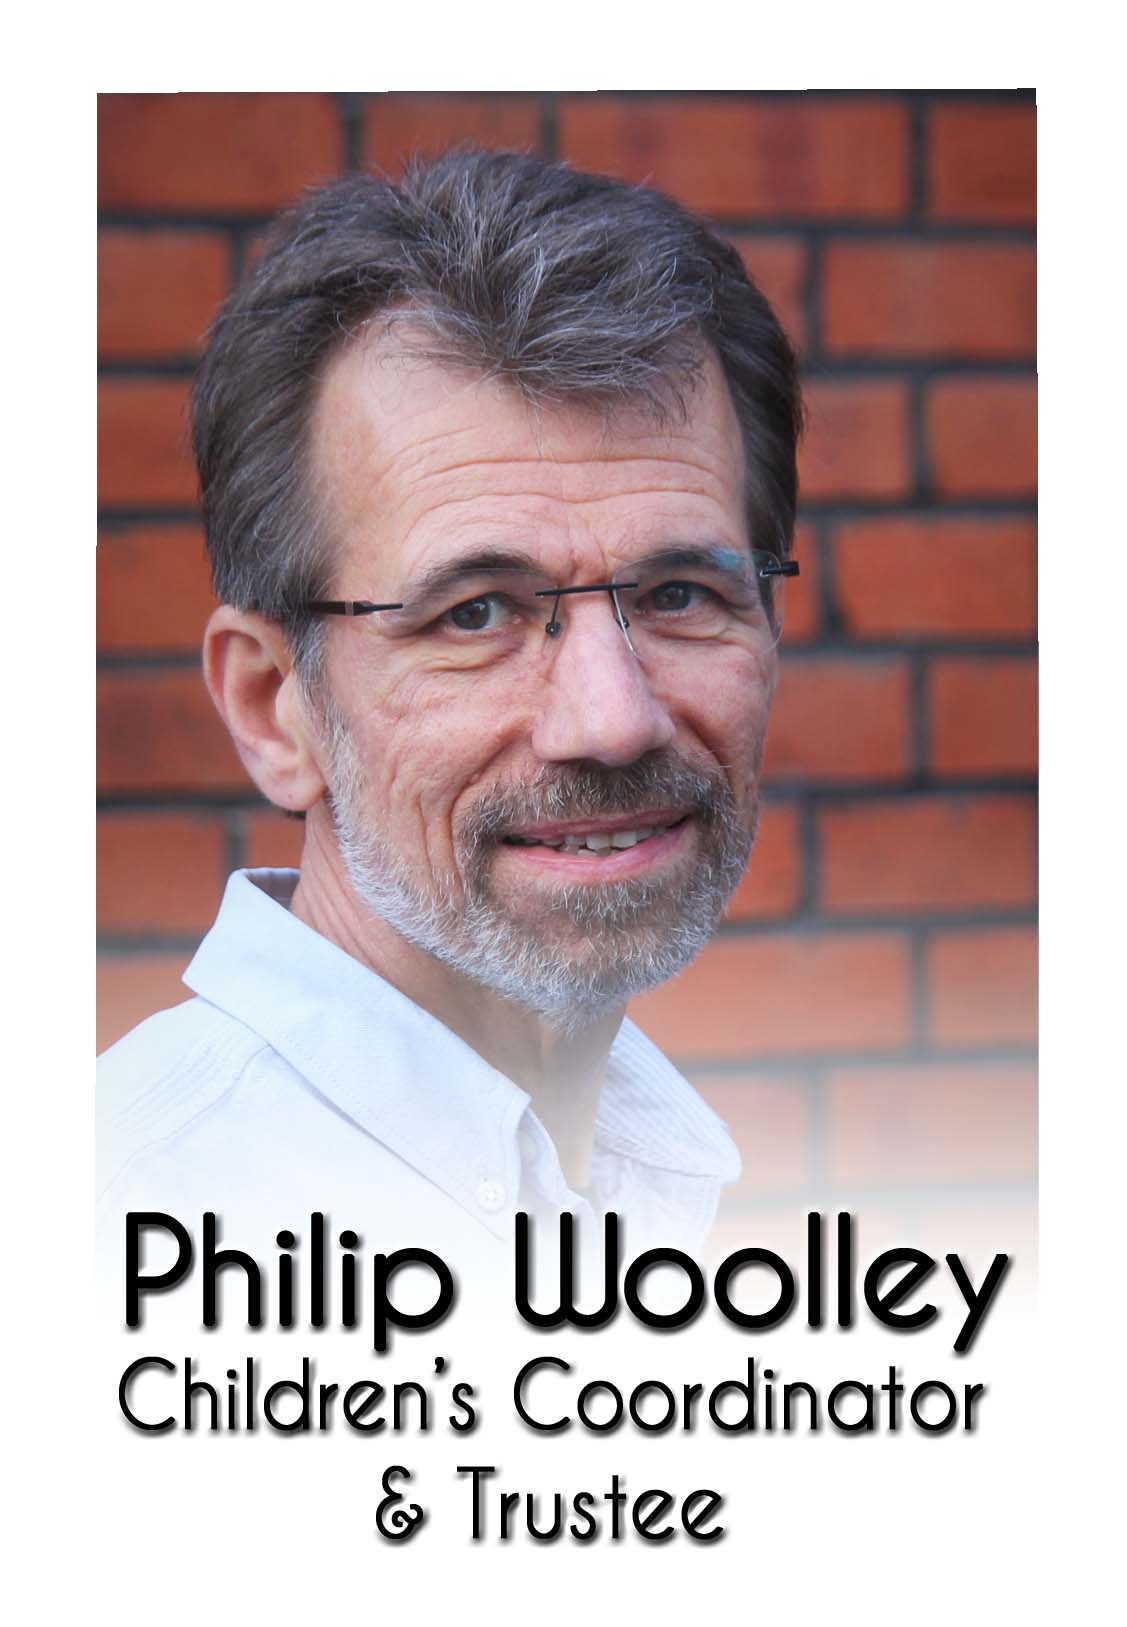 Philip Woolley labelled